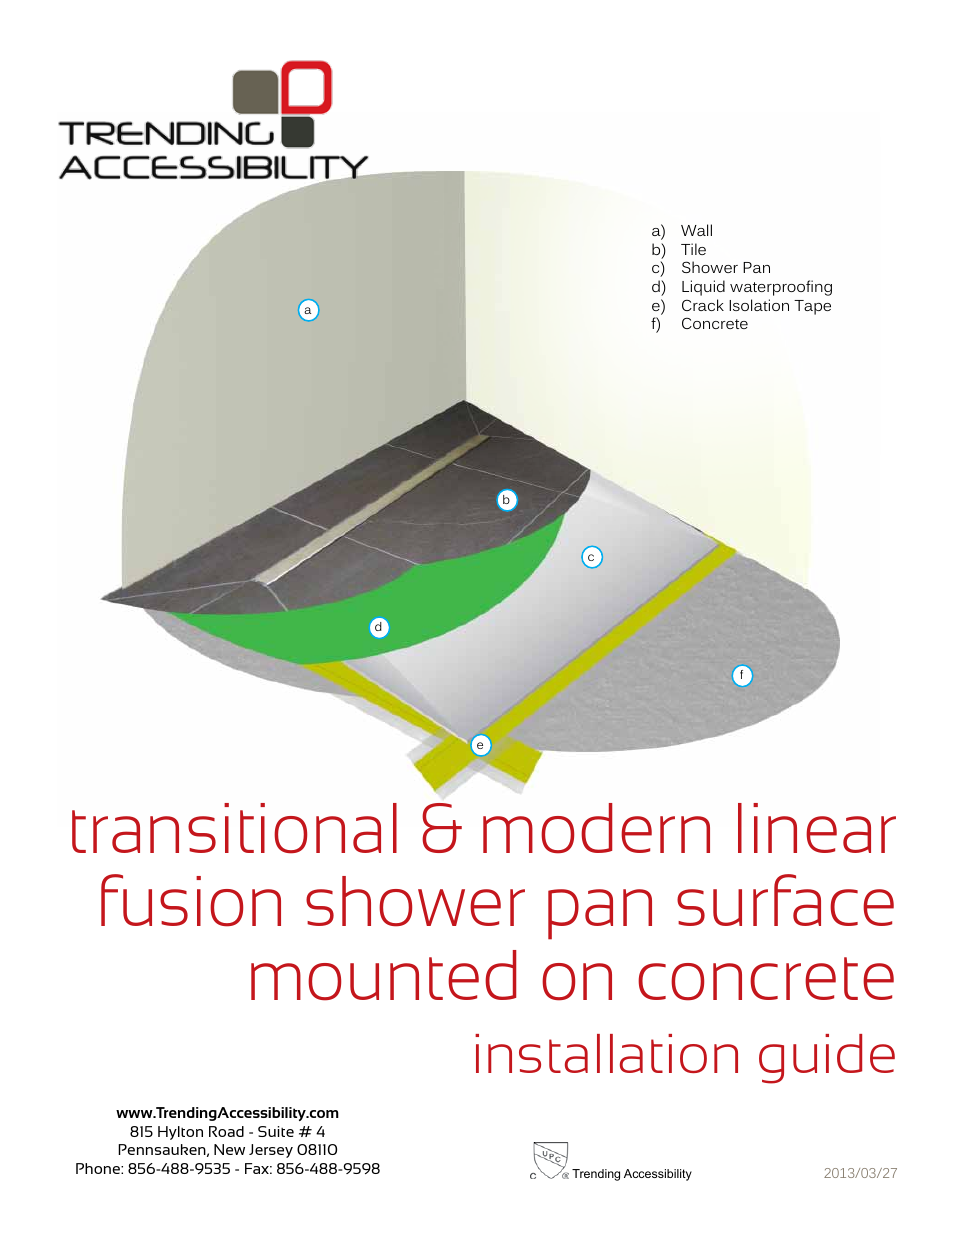 Transitional & modern linear fusion shower pan surface mounted on concrete